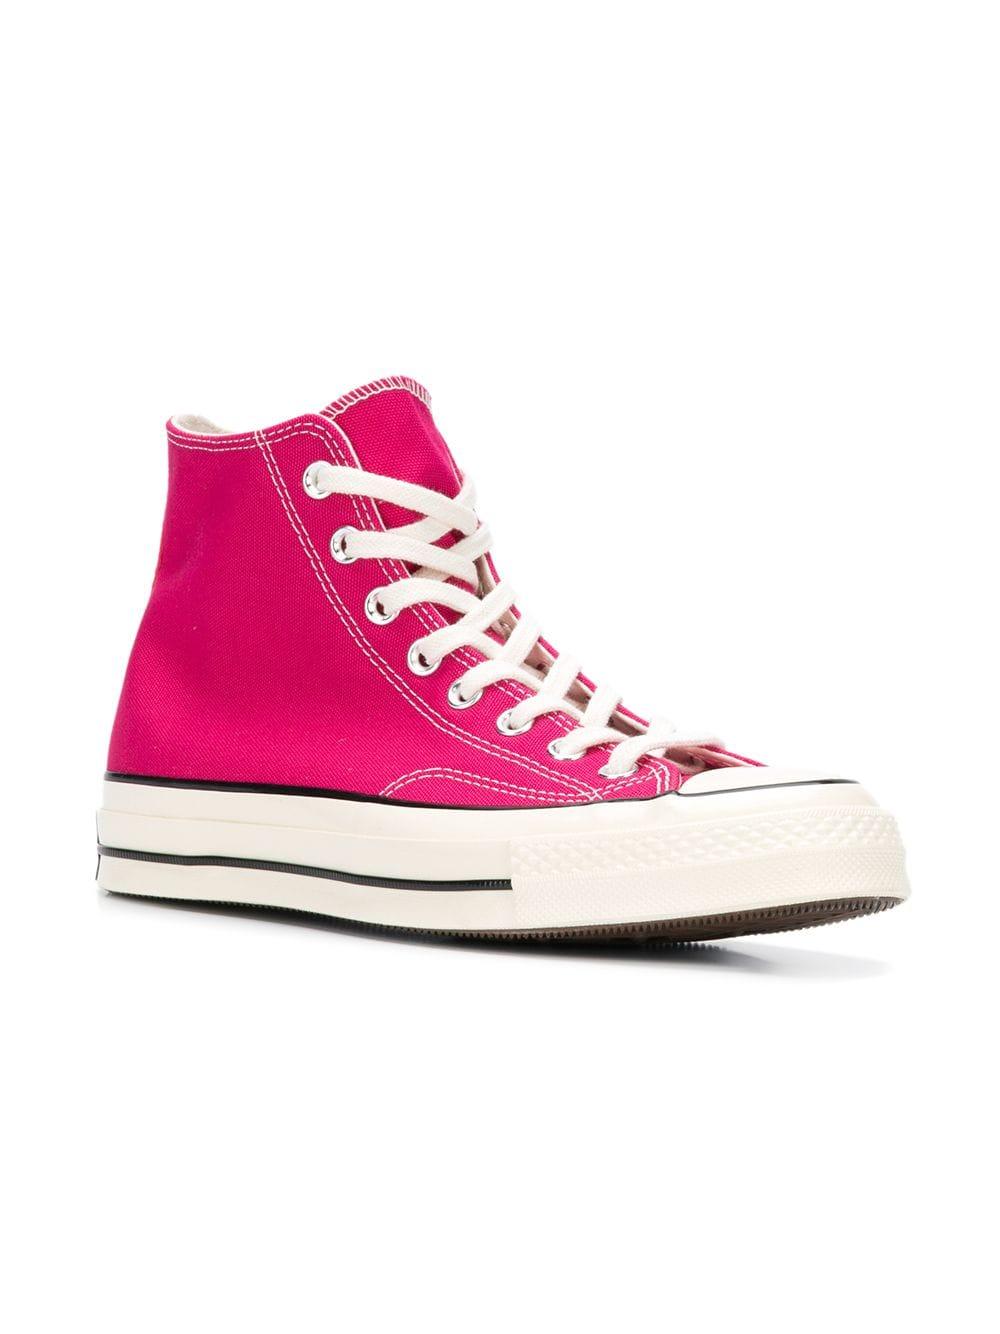 Download Converse Cotton Chuck 70 Hi-top Sneakers in Pink - Lyst